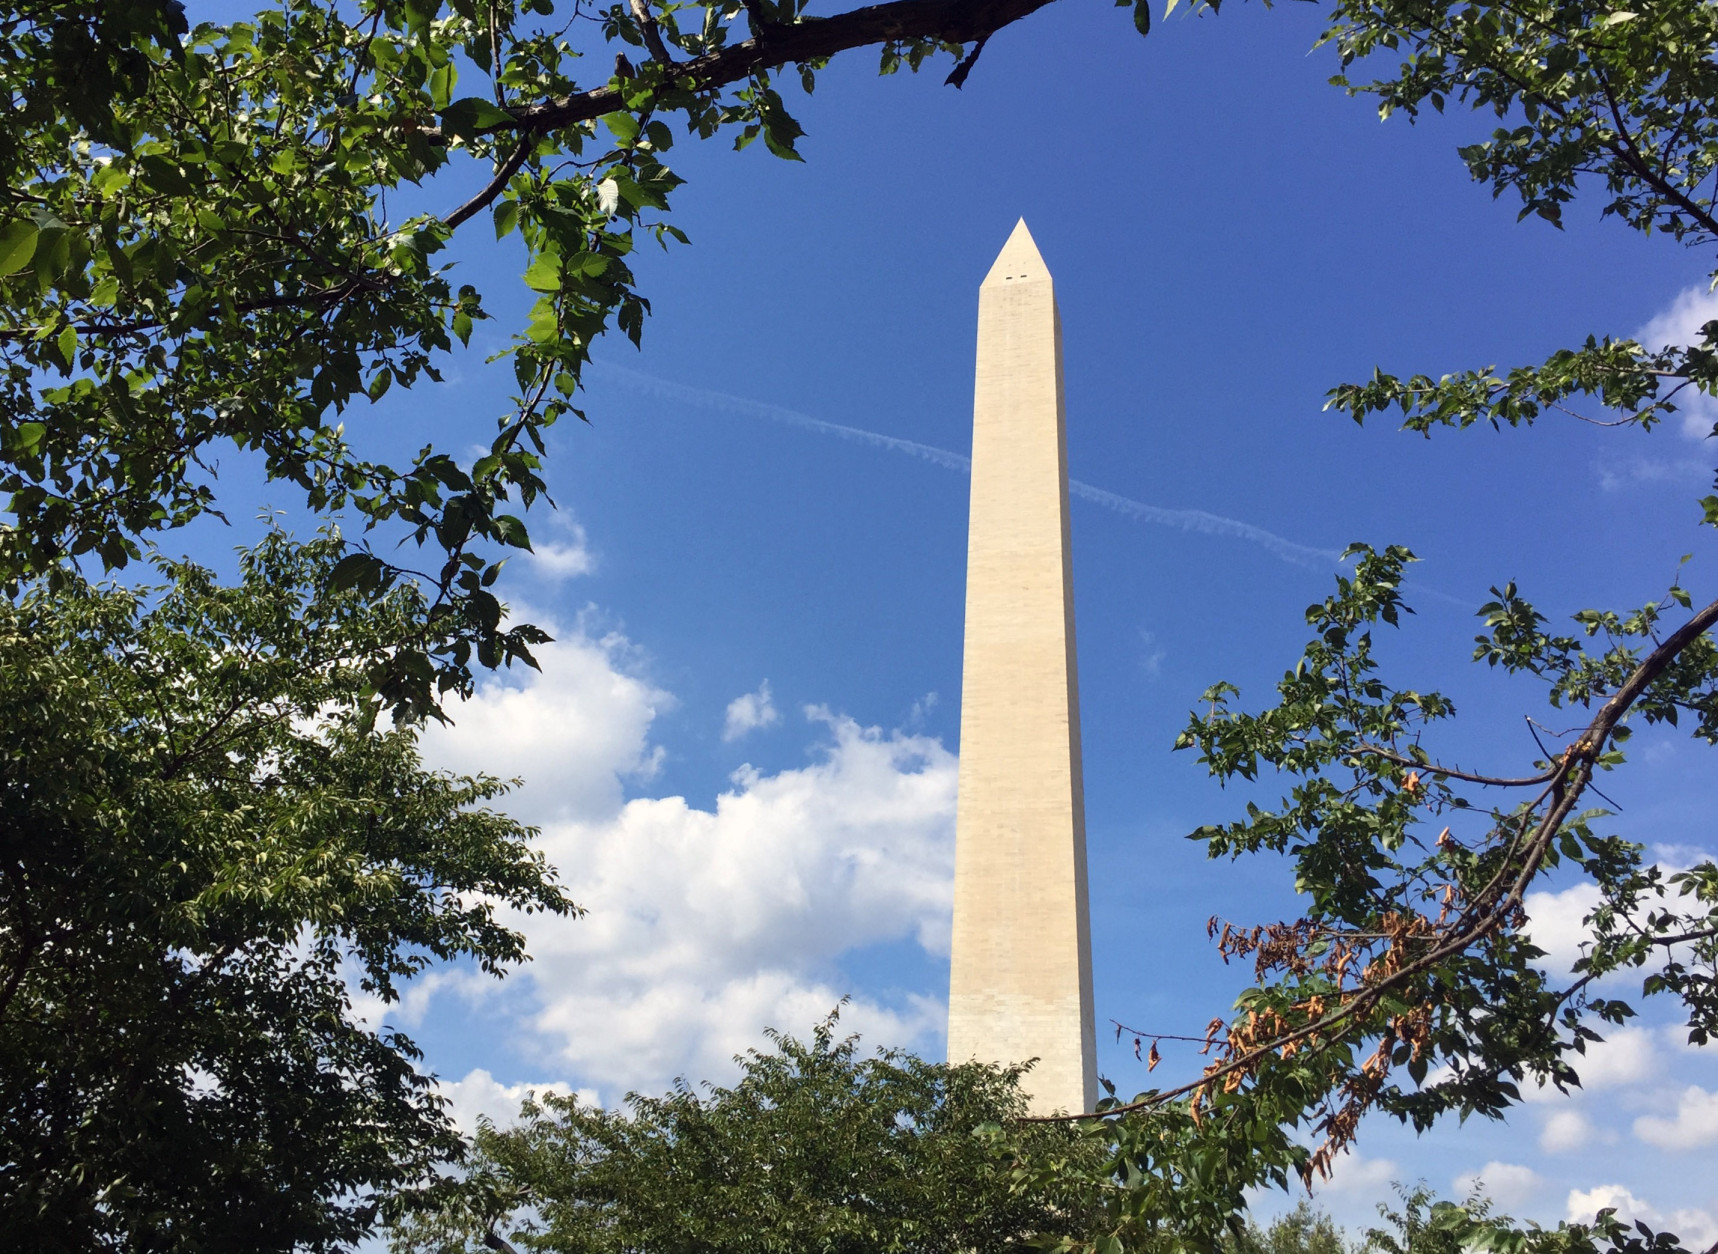 The Washington Monuments remains closed for elevator repairs and inspections on Wednesday, Aug. 24, 2016. National Park officials said that the work will keep the historic landmark shuttered until mid-September. Another 8-month to 9-month closure will be needed to fully modernize the aging elevator. (WTOP/Kristi King)